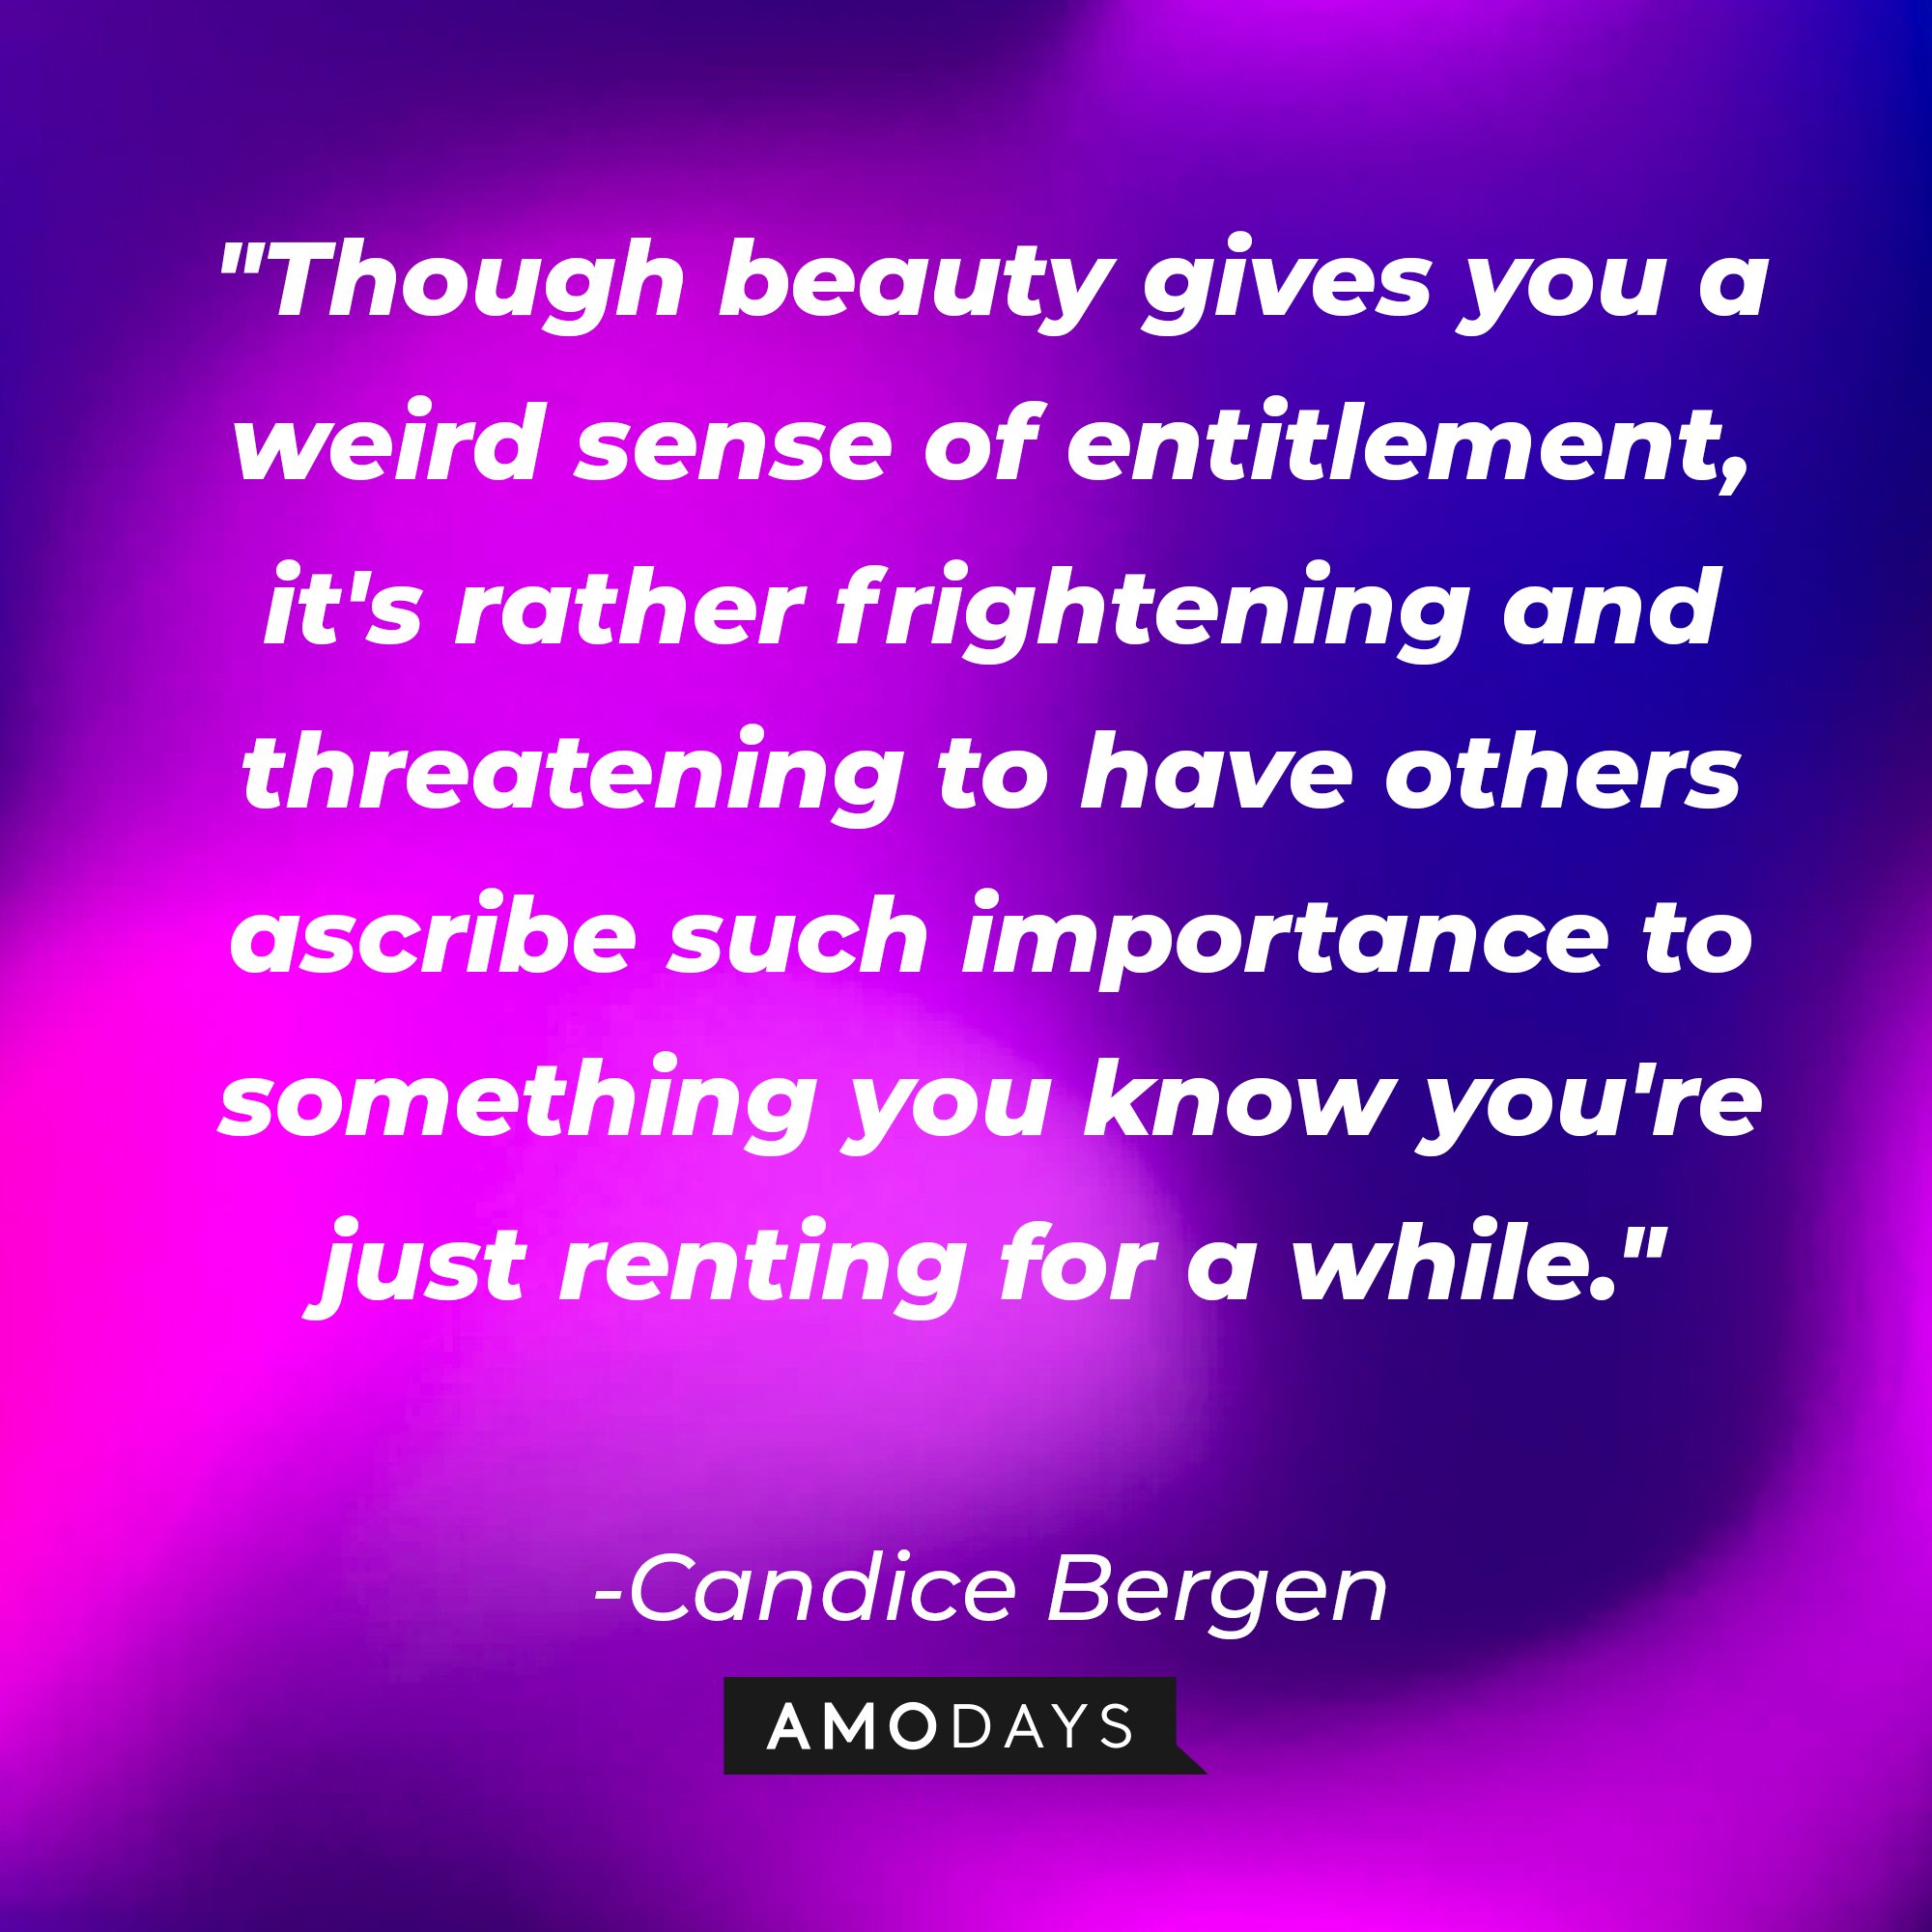 Candice Bergen’s quote: "Though beauty gives you a weird sense of entitlement, it's rather frightening and threatening to have others ascribe such importance to something you know you're just renting for a while." | Image: AmoDays